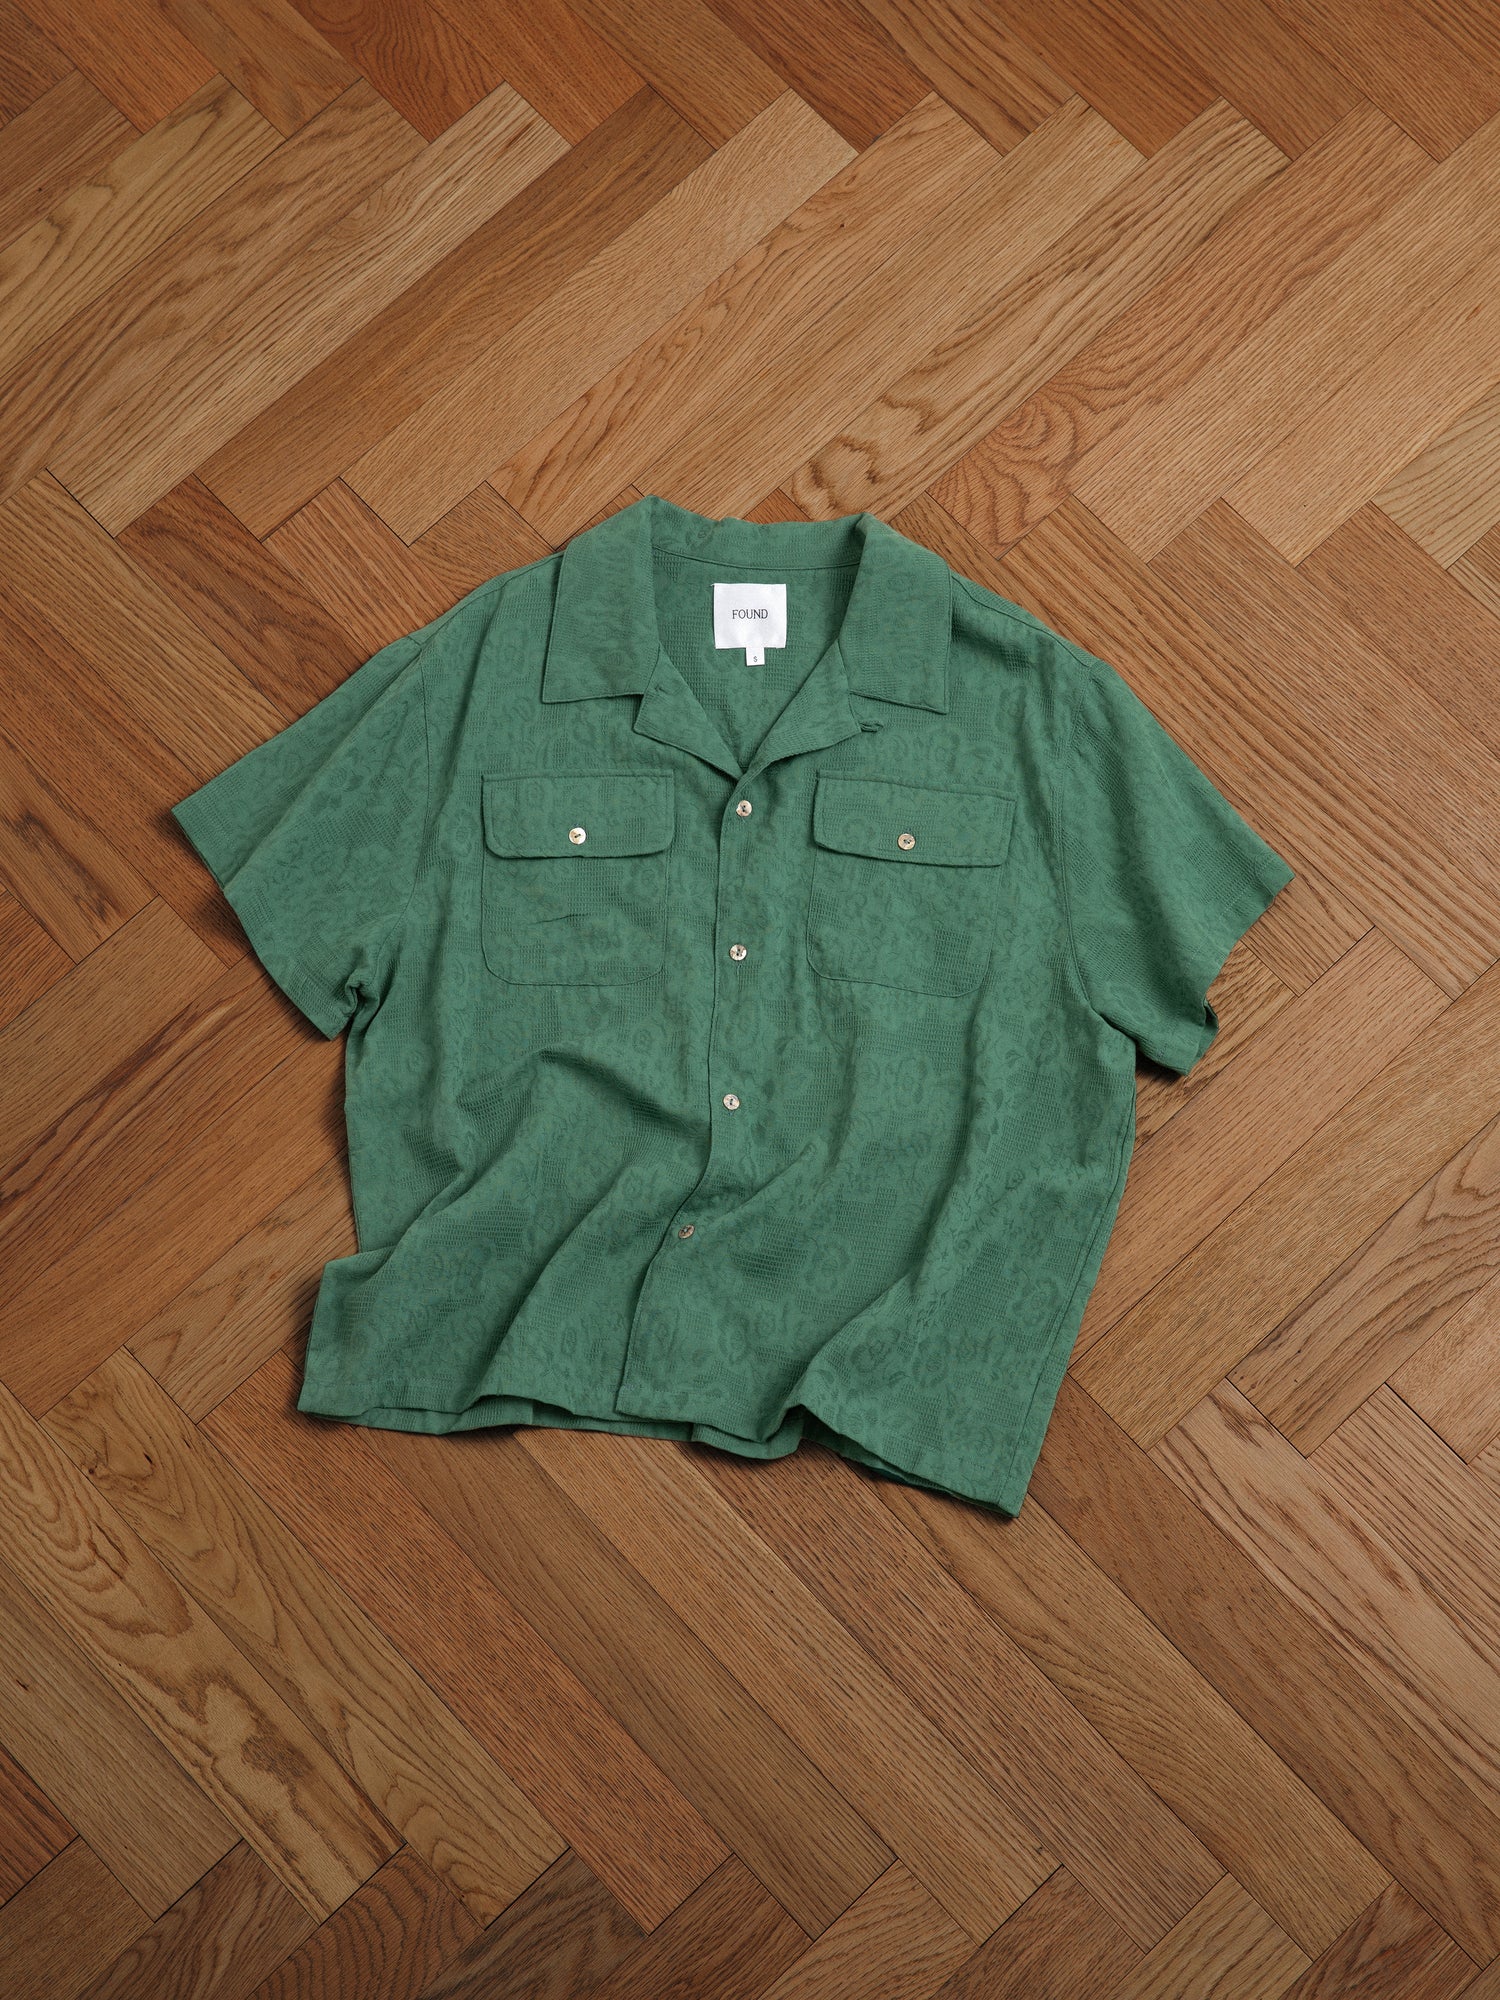 A premium cotton Mount Camp Shirt by Found with lace detailing laying on a wooden floor.